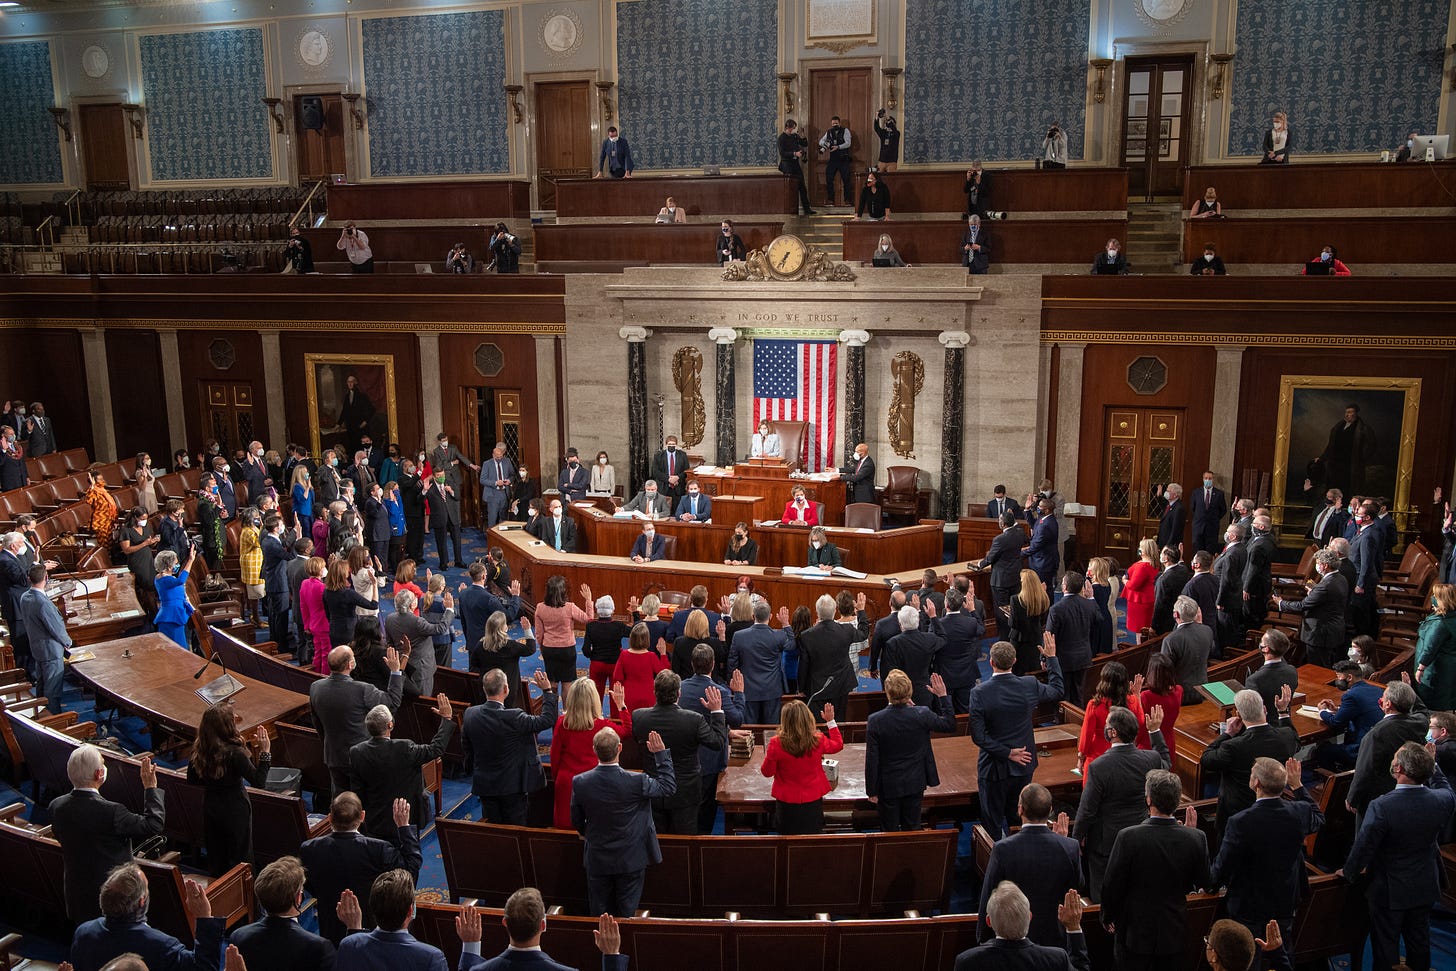 Members of the 117th Congress Sworn In | house.gov